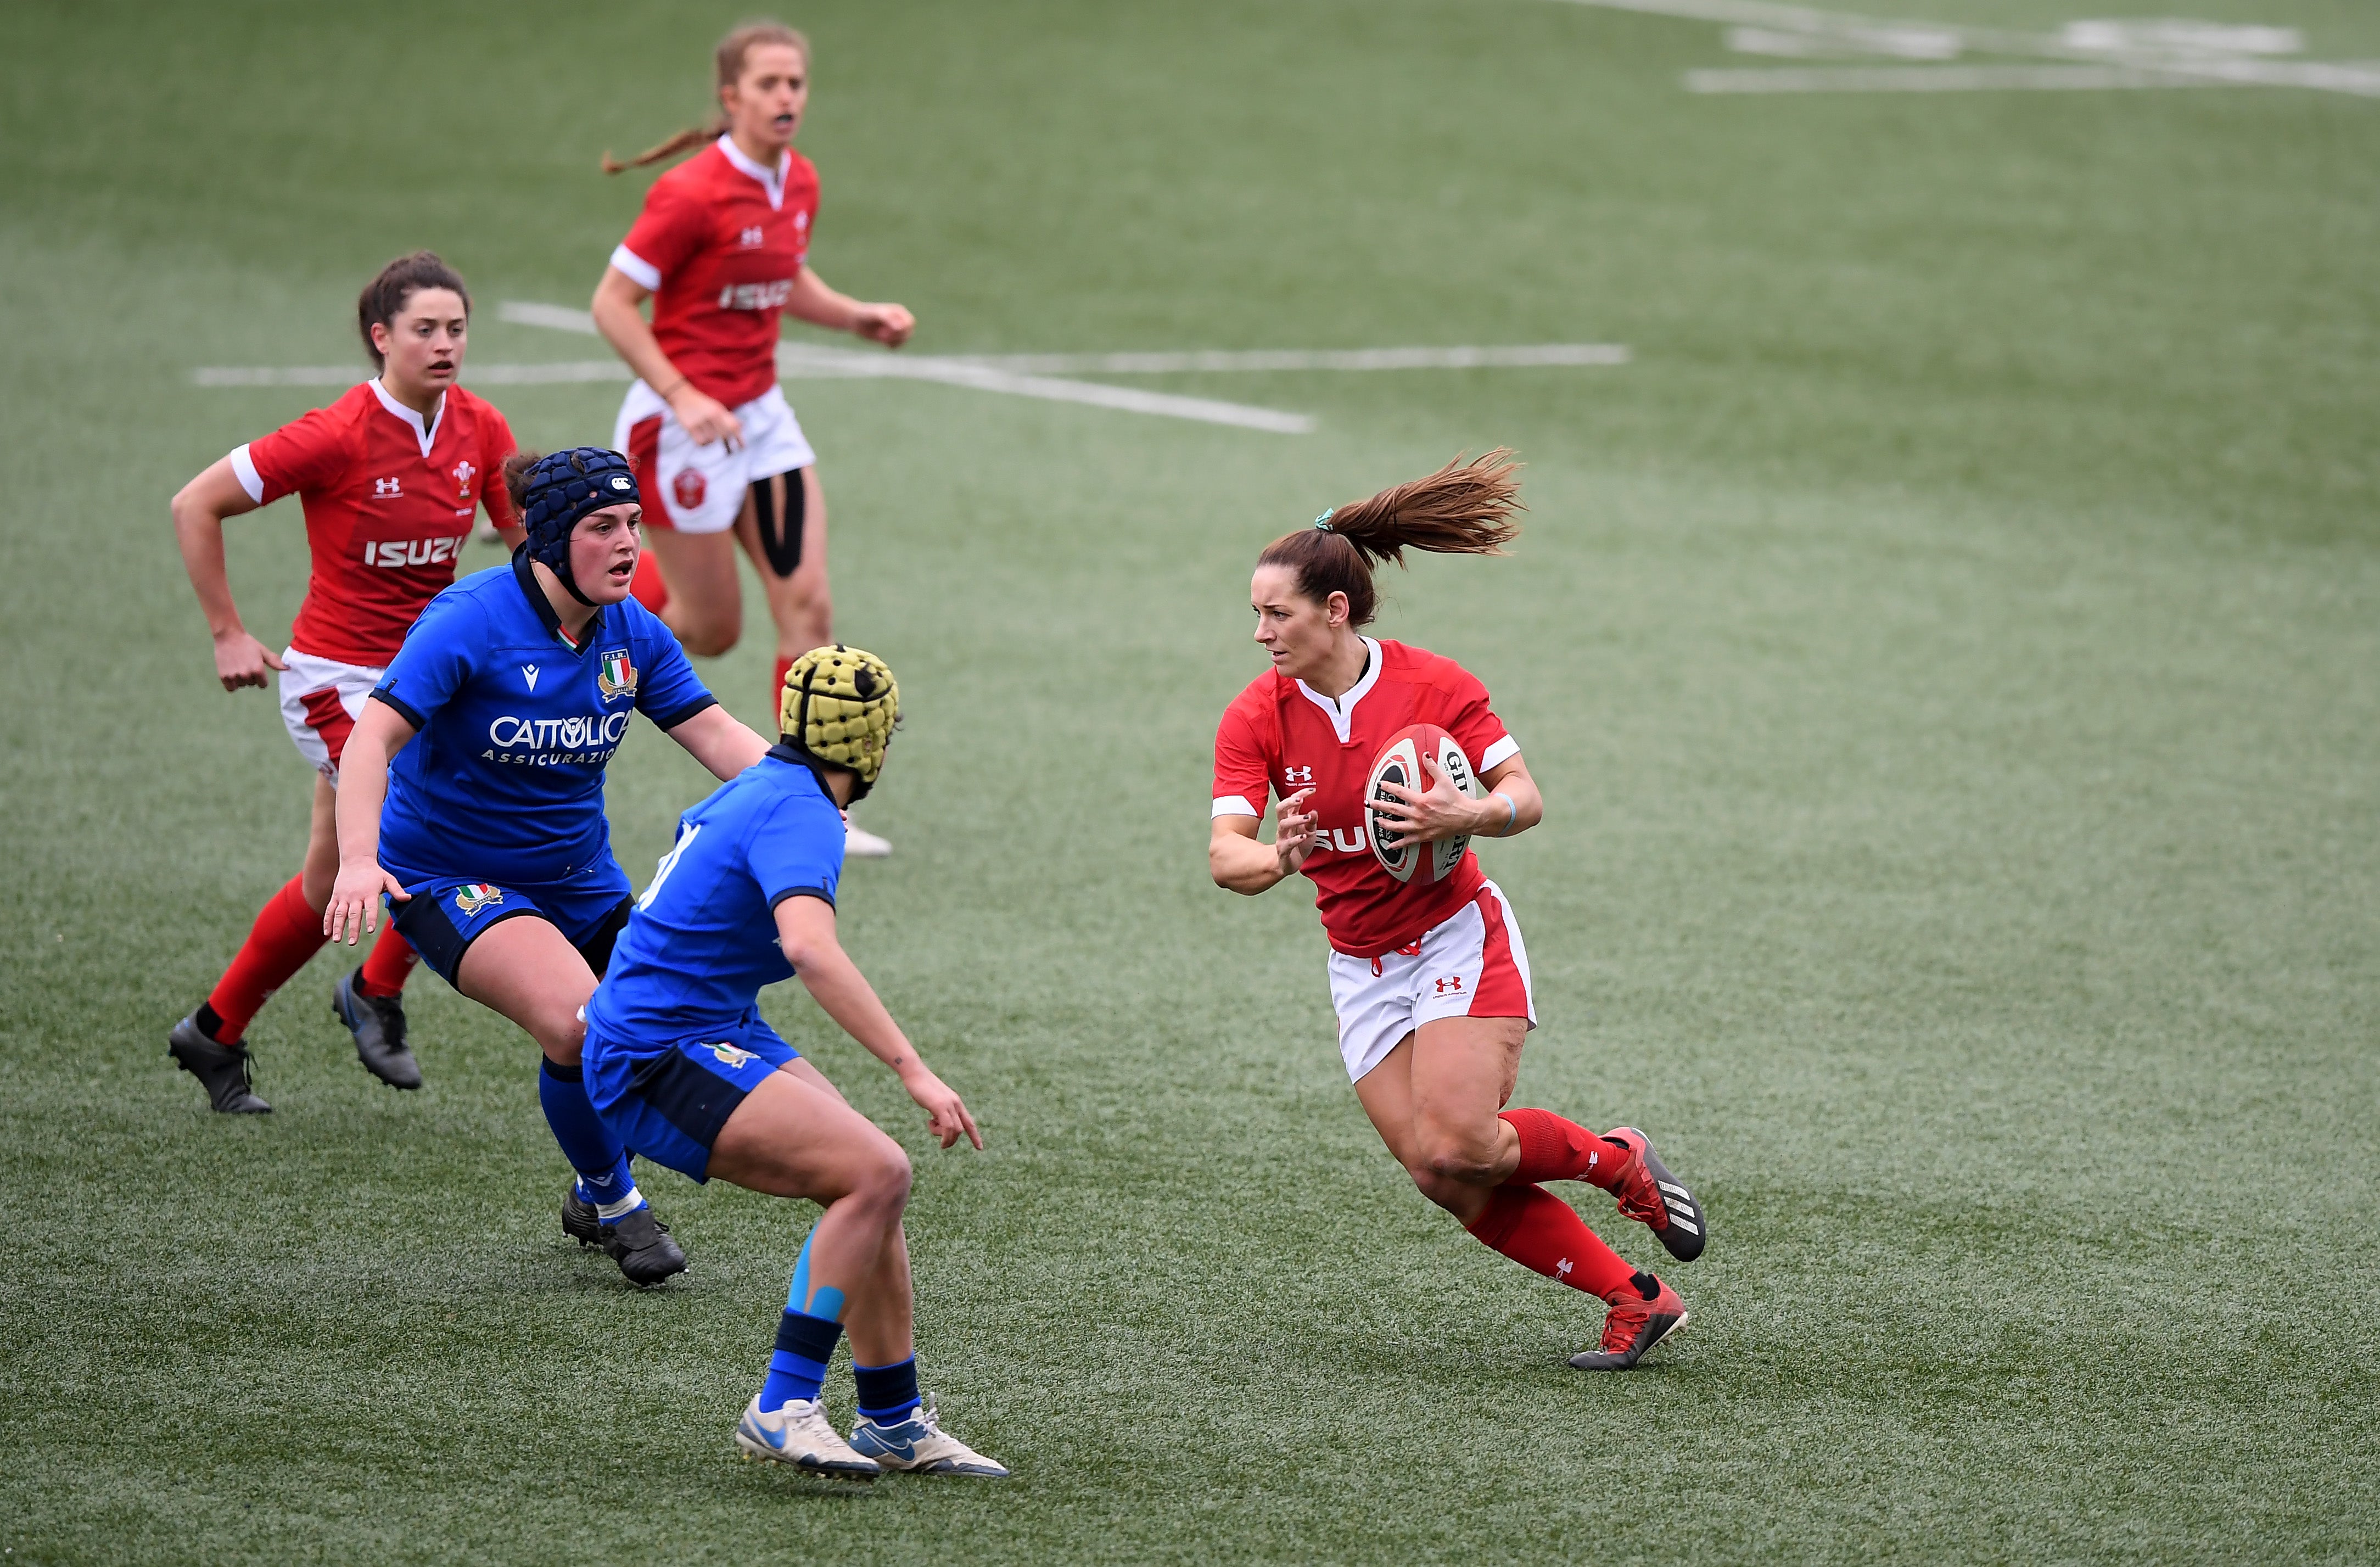 Wales and Italy last met in the Women’s Six Nations in 2020